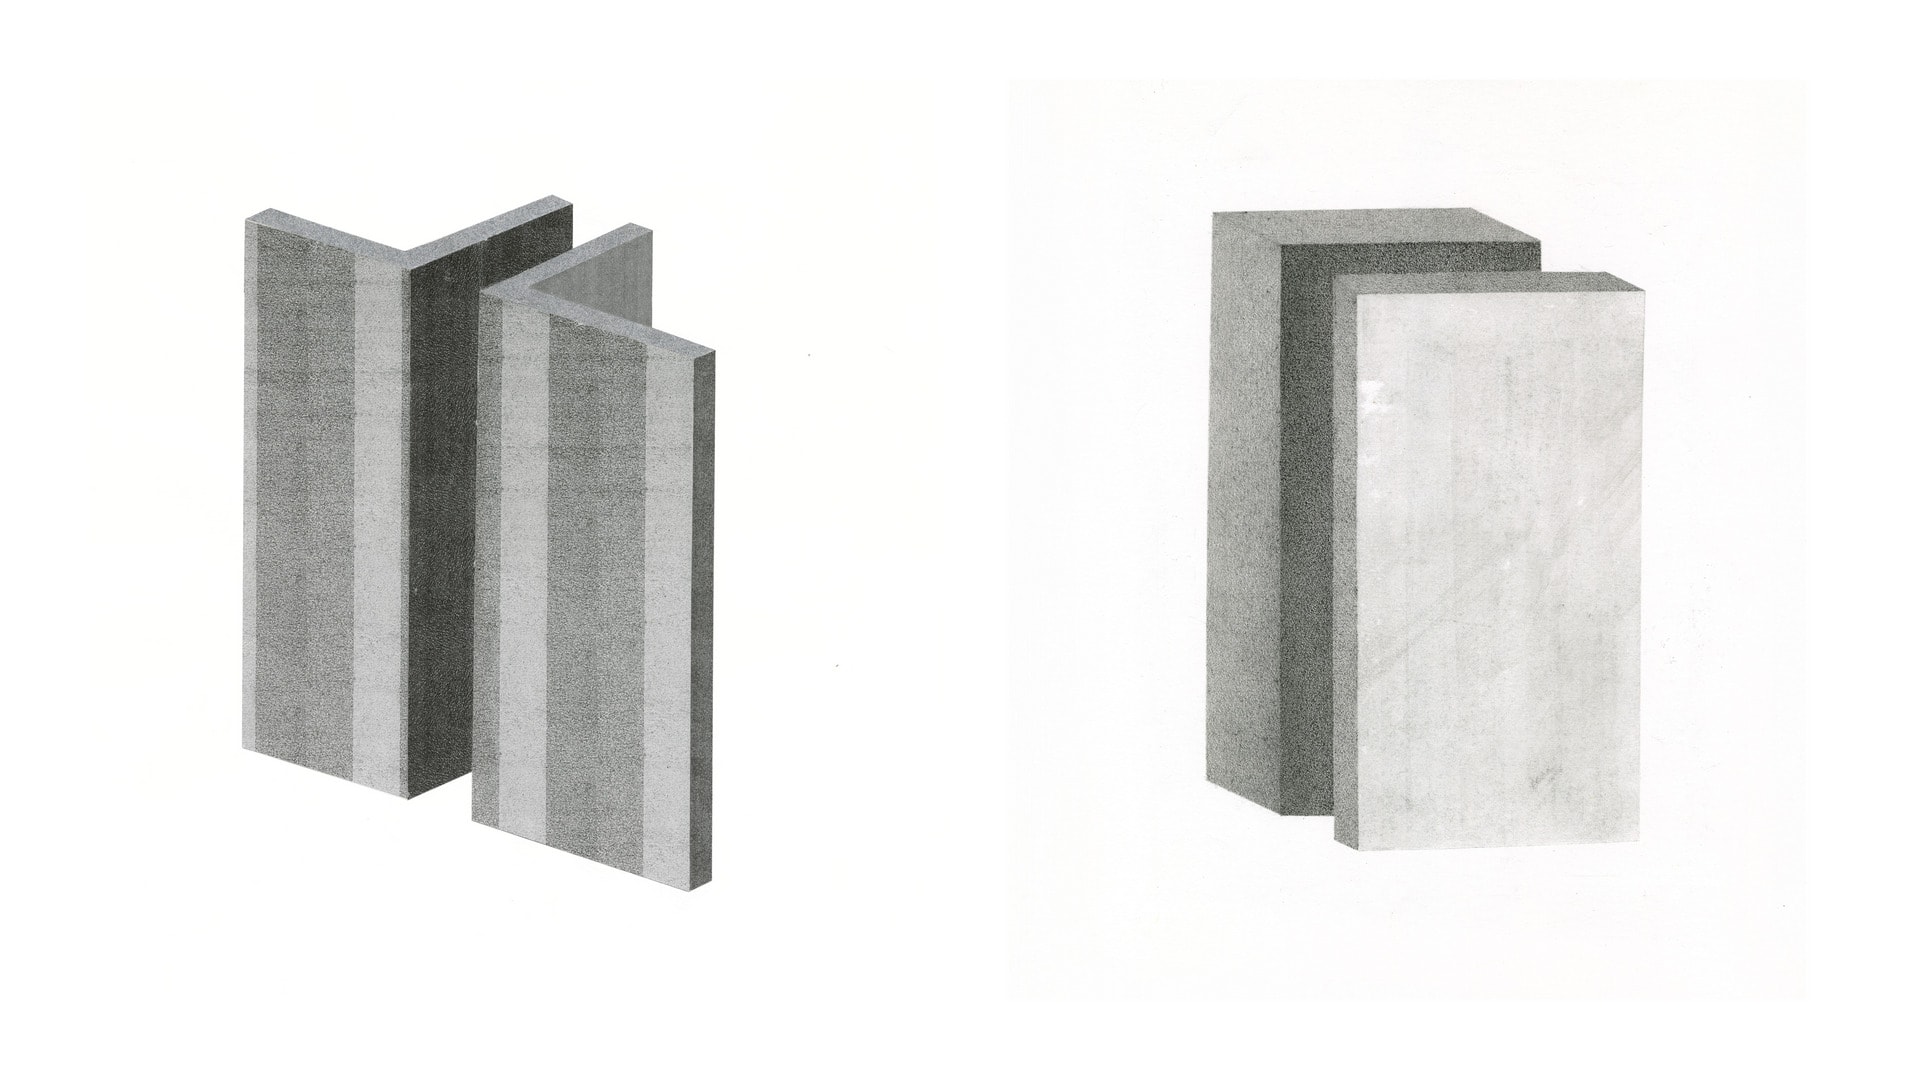 Two pieces of pencil drawings show about space in-between two objects. 